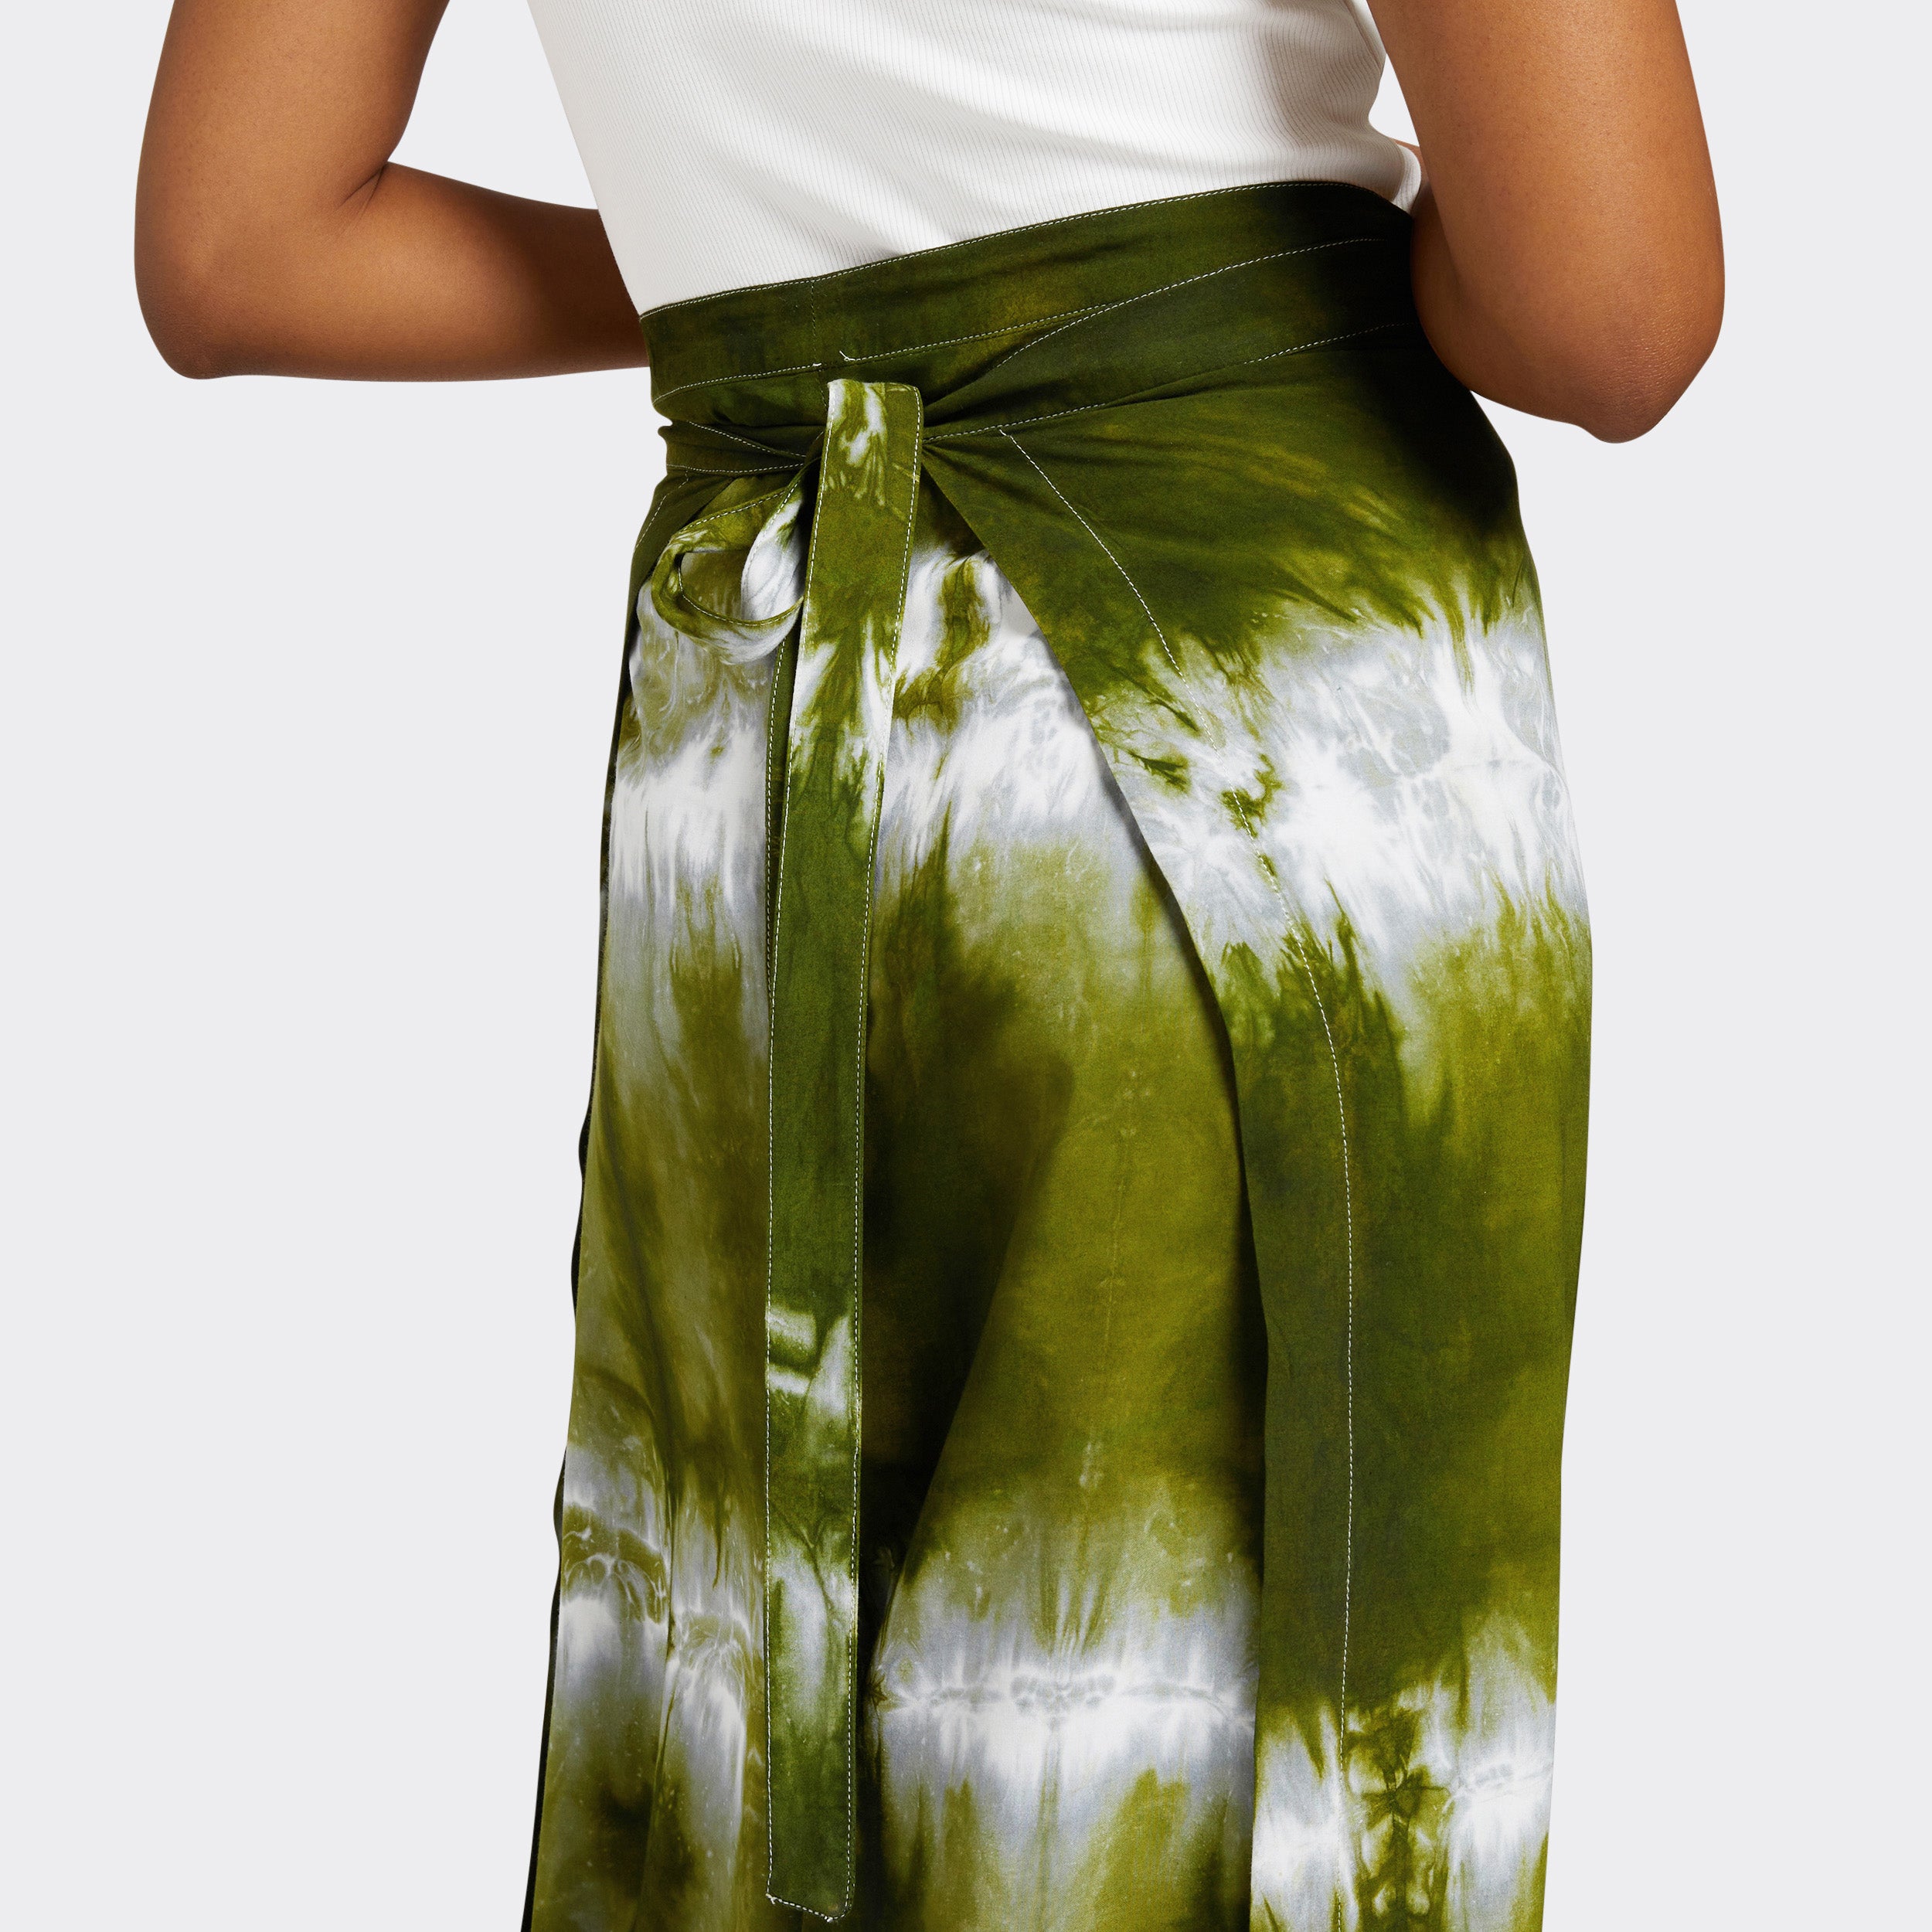 Model wears Wrap Trousers in Tie Dye Intense Green where you can she the tie knot detail, with a plain white top.